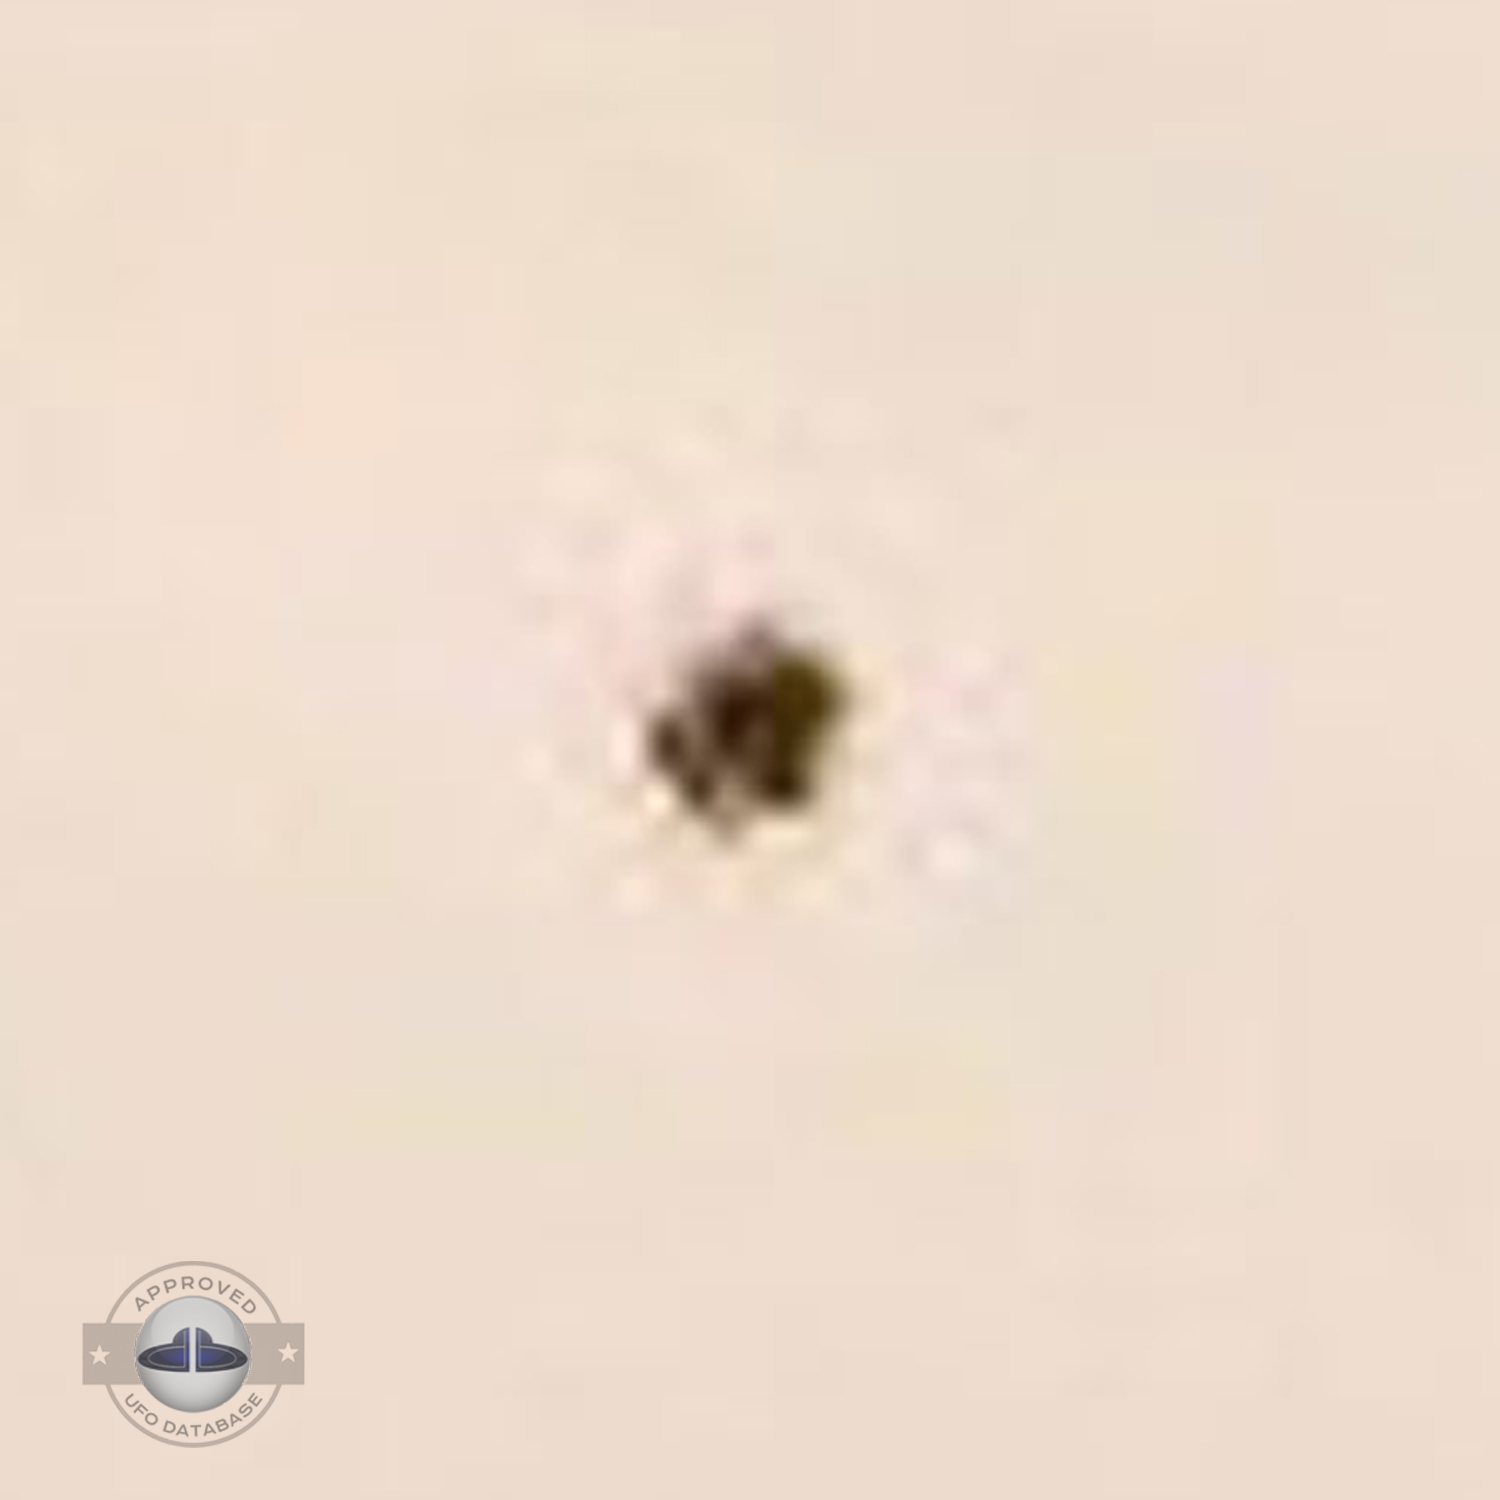 UFO Picture - UFO Sighting over Great Lake Michigan - October 1979 UFO Picture #91-4